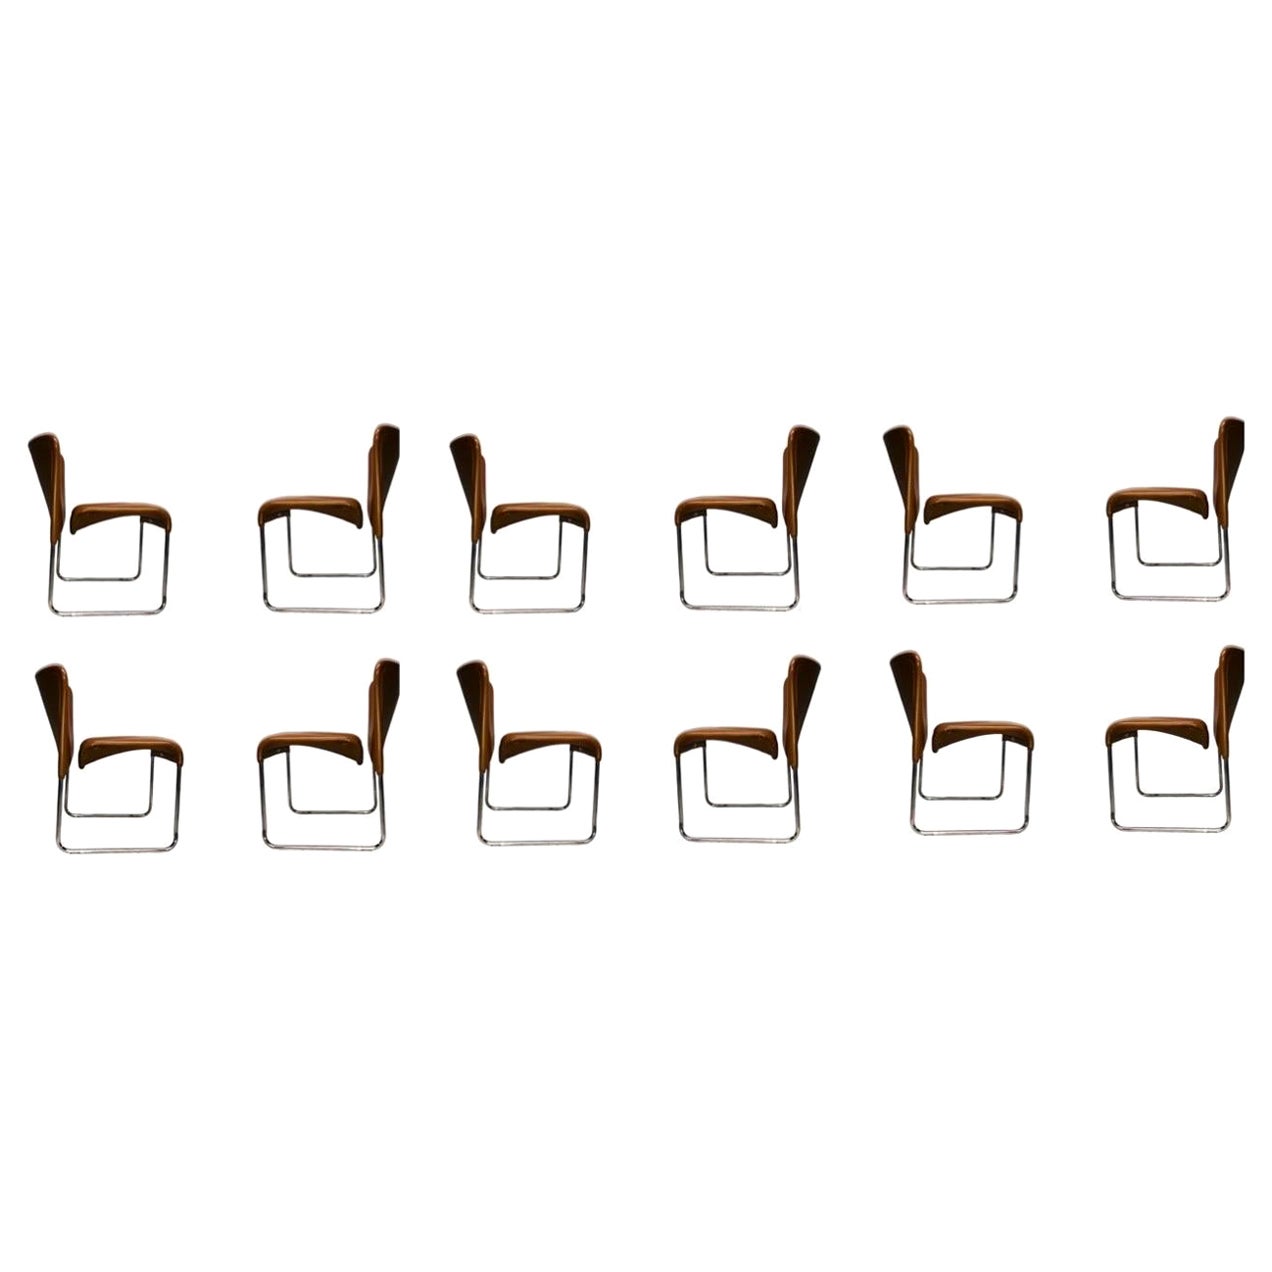 This is a set of 6 unusual Bauhaus Cantilever Dining Chairs, designed by Marcello Cuneo for Mobel Italia in the early 1970s. These were imported from Italy via Stendig, and were initially retailed & purchased through their NYC showroom. The listed